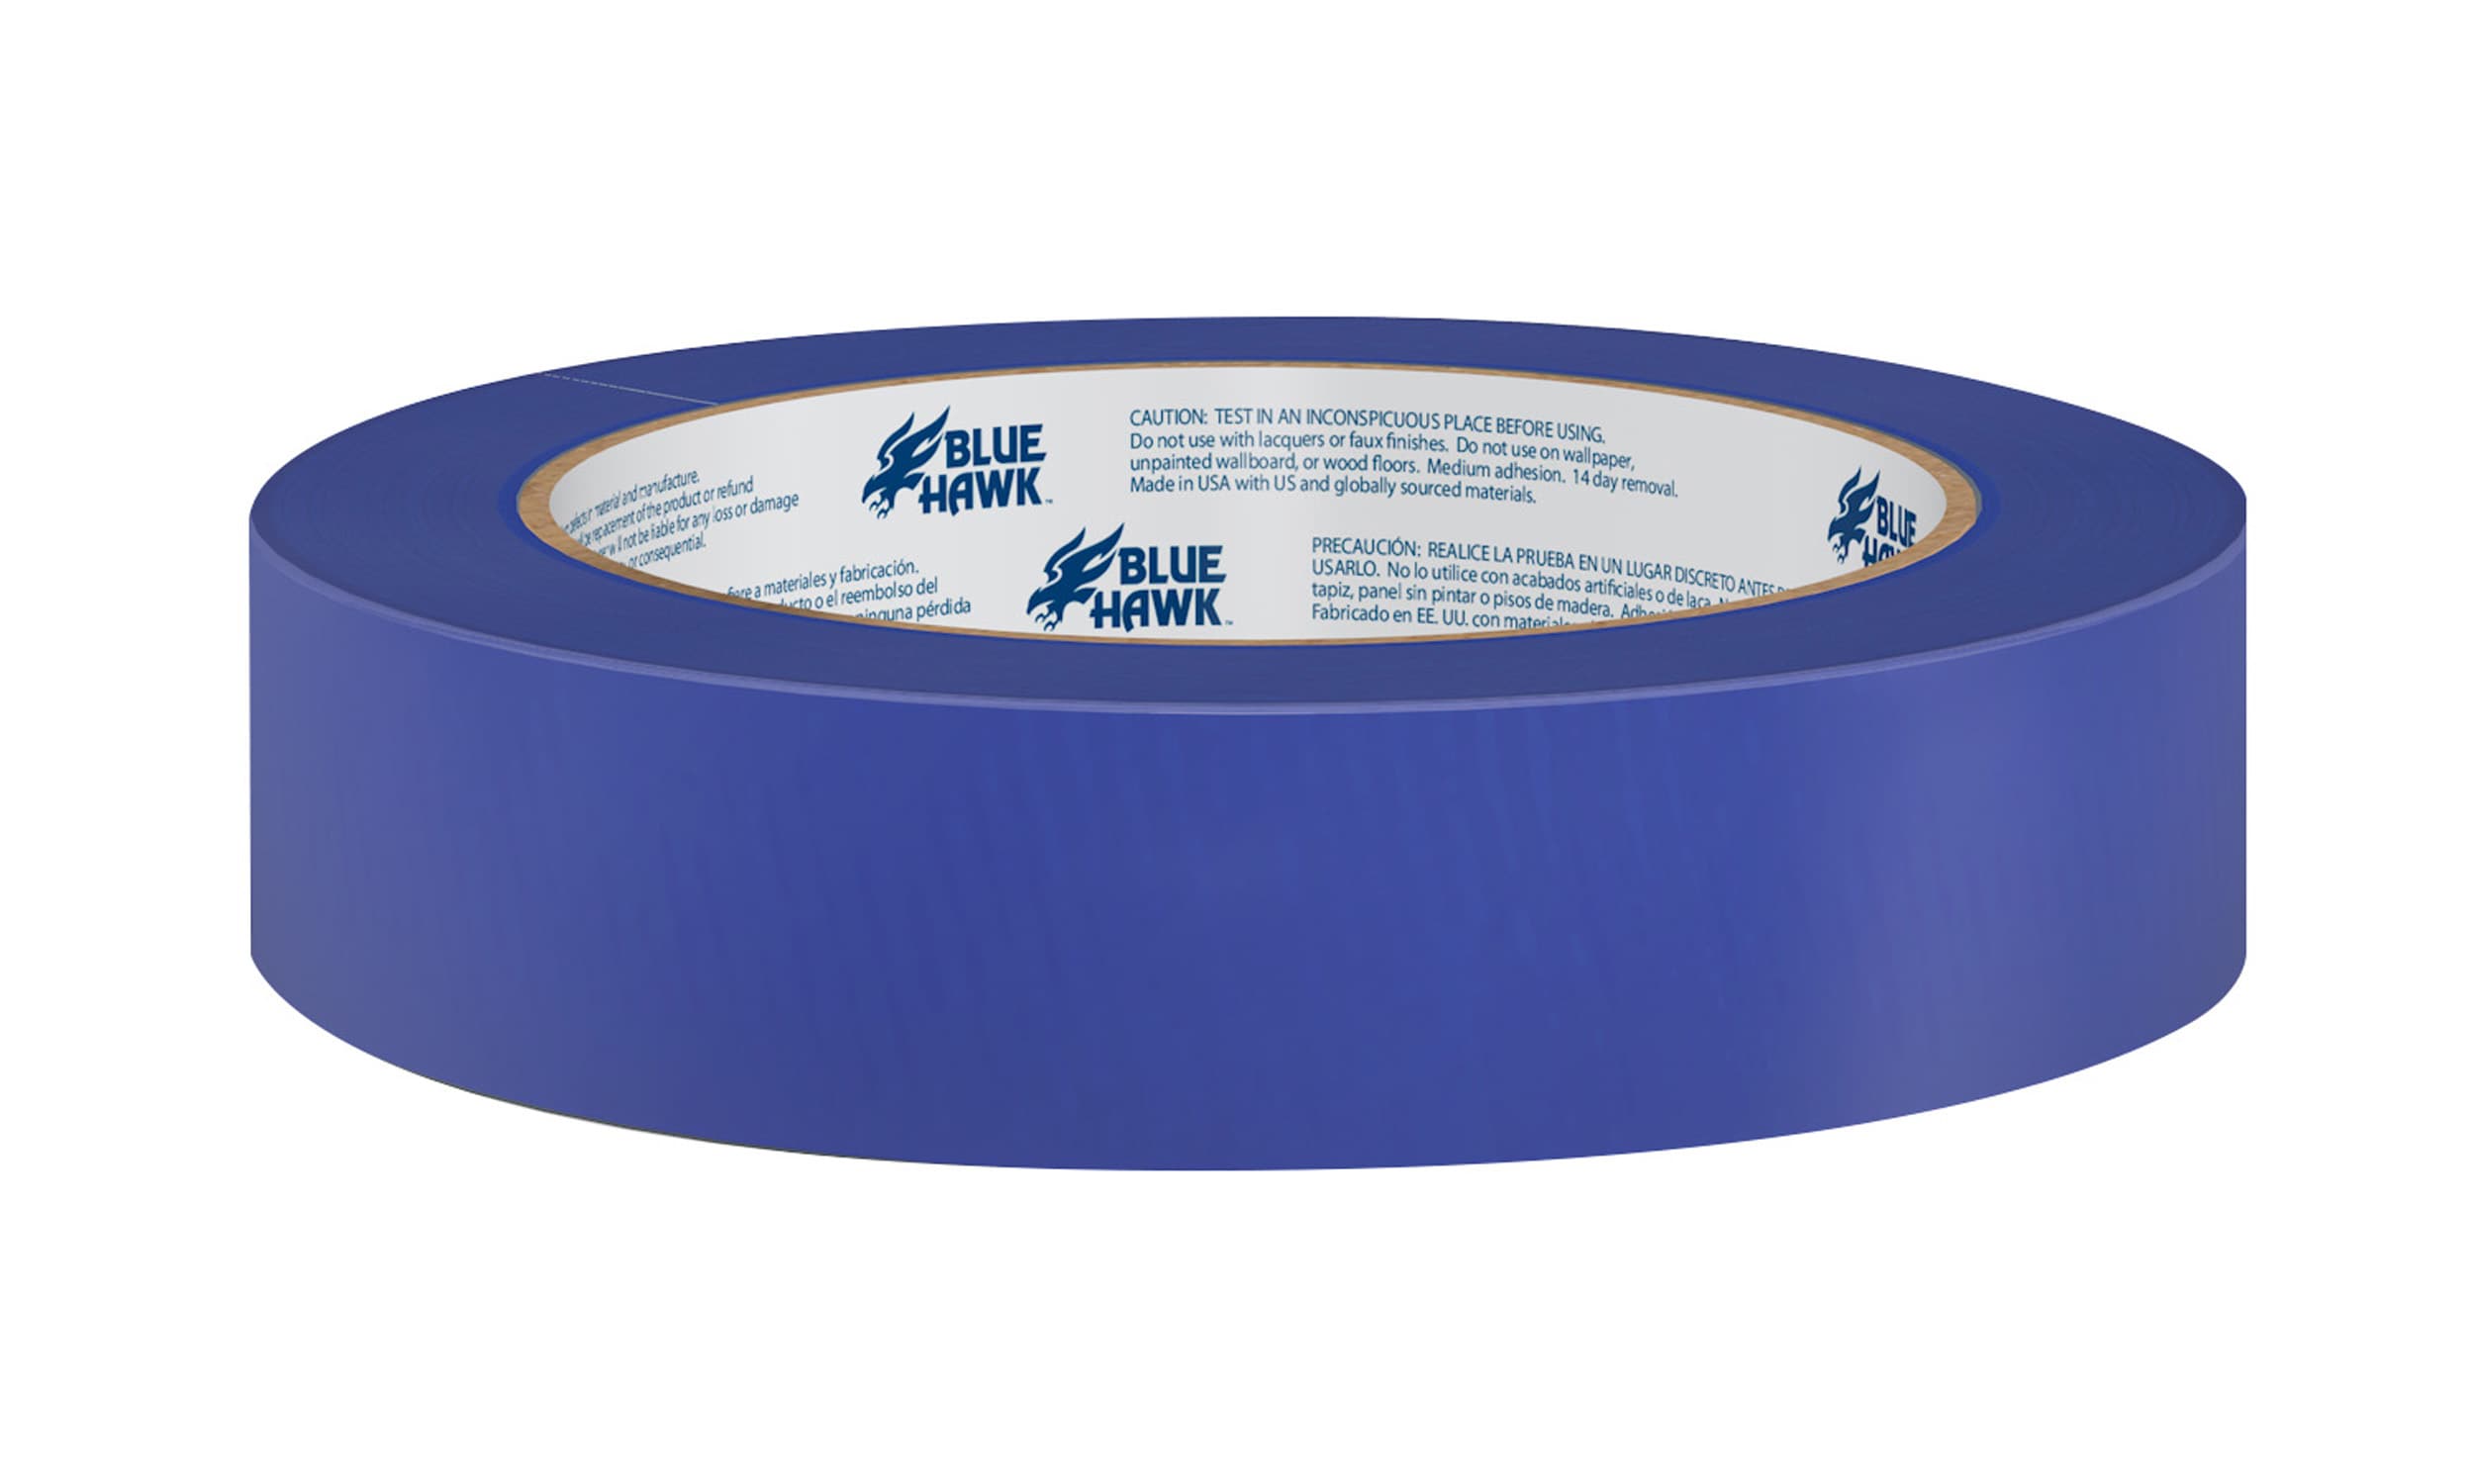 Wod Tape Blue Painters Tape 2.83 in x yd. Made in USA, 4 Pack